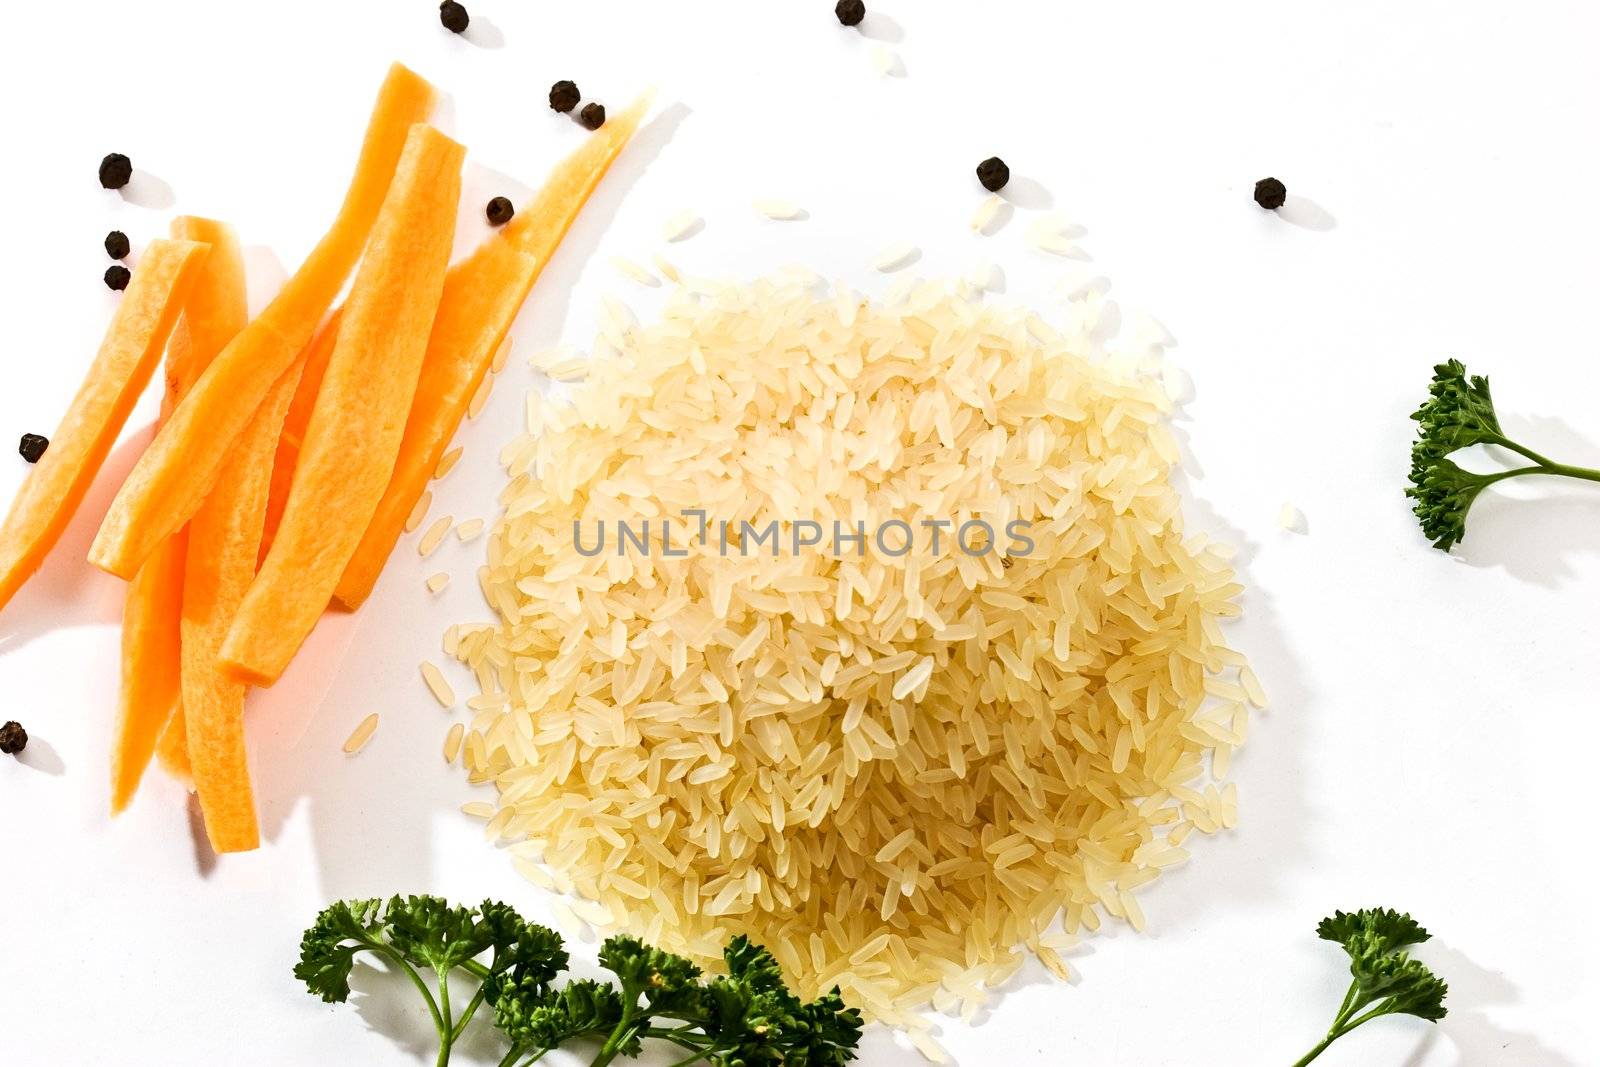 hill of raw rice with vegetables 
and parsley